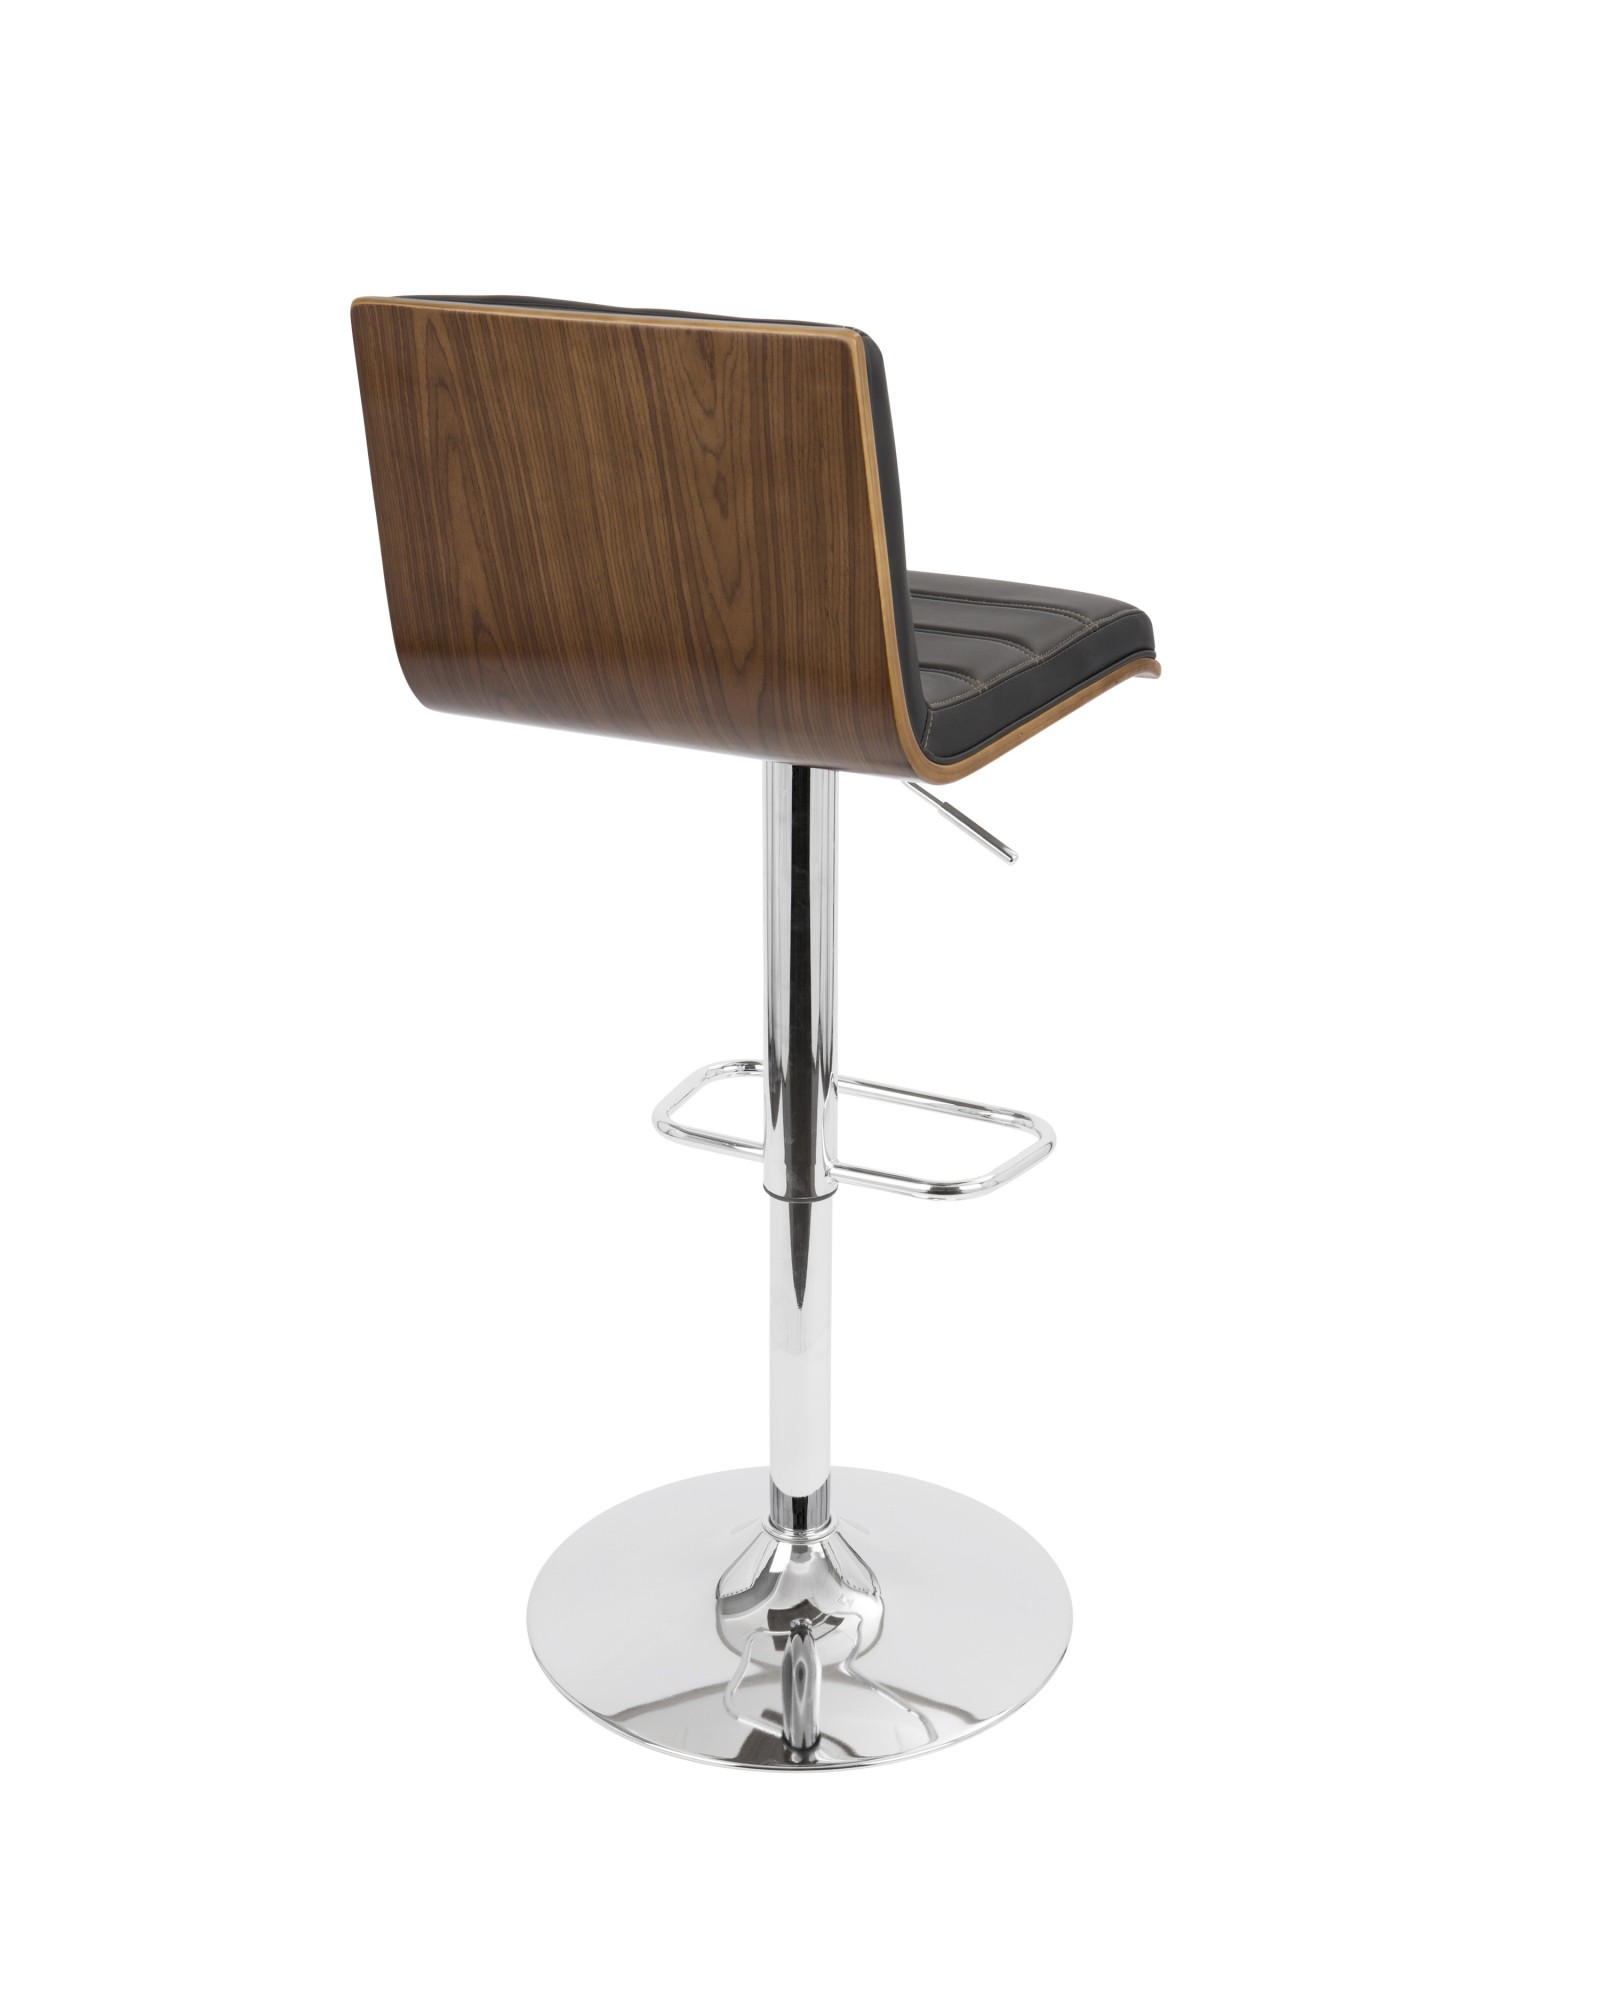 Vasari Mid-Century Modern Adjustable Barstool with Swivel in Walnut and Black Faux Leather